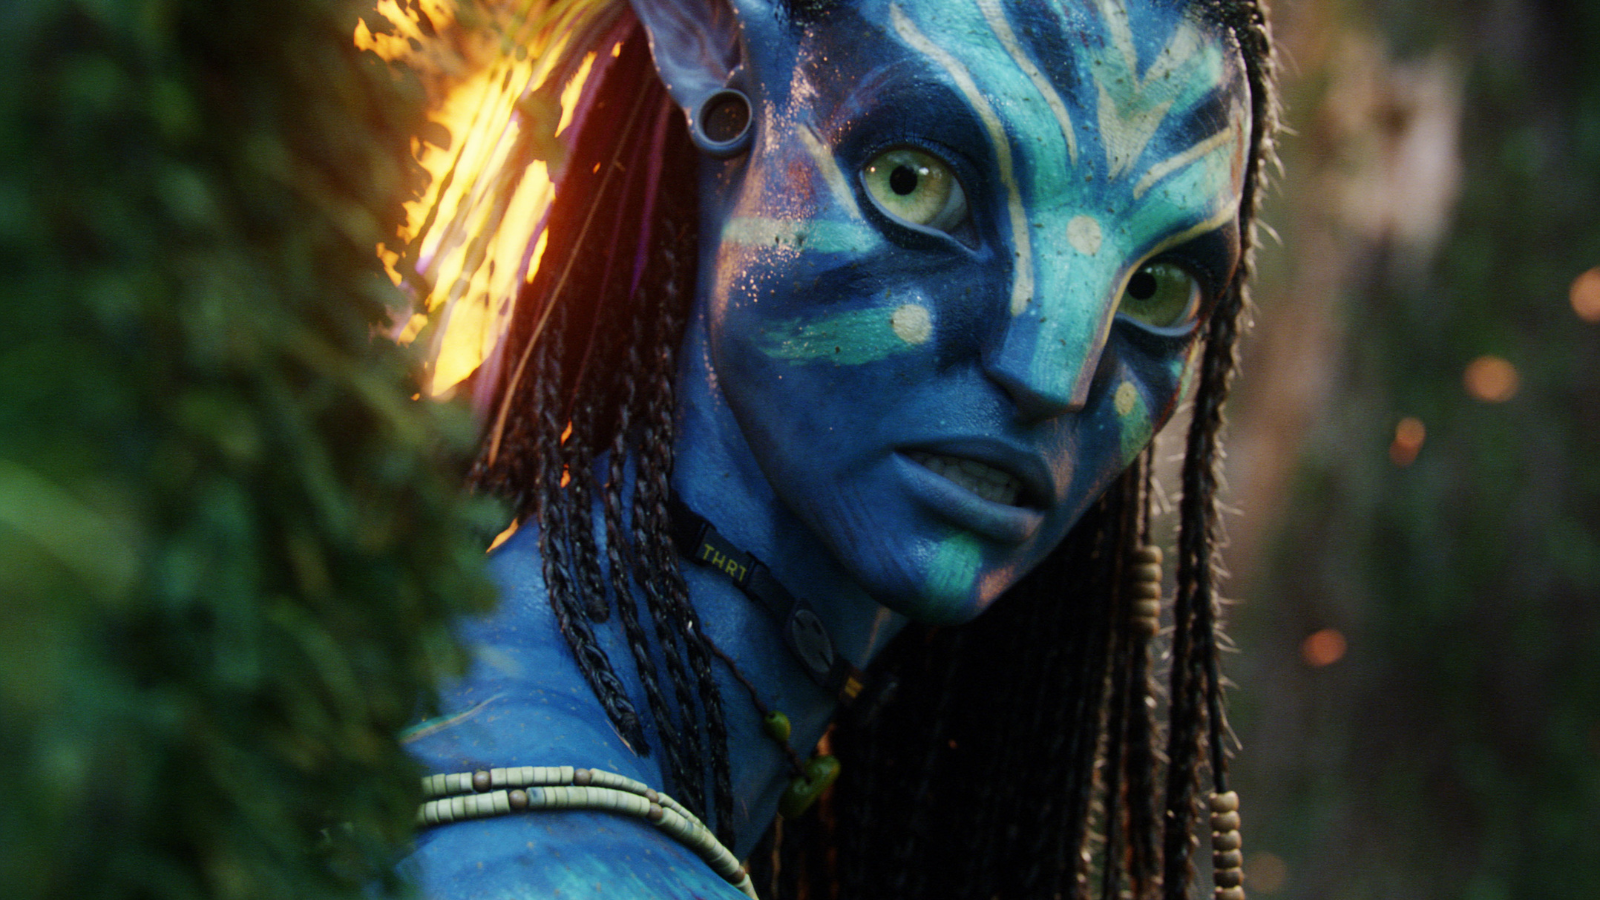 How to watch 'Avatar'